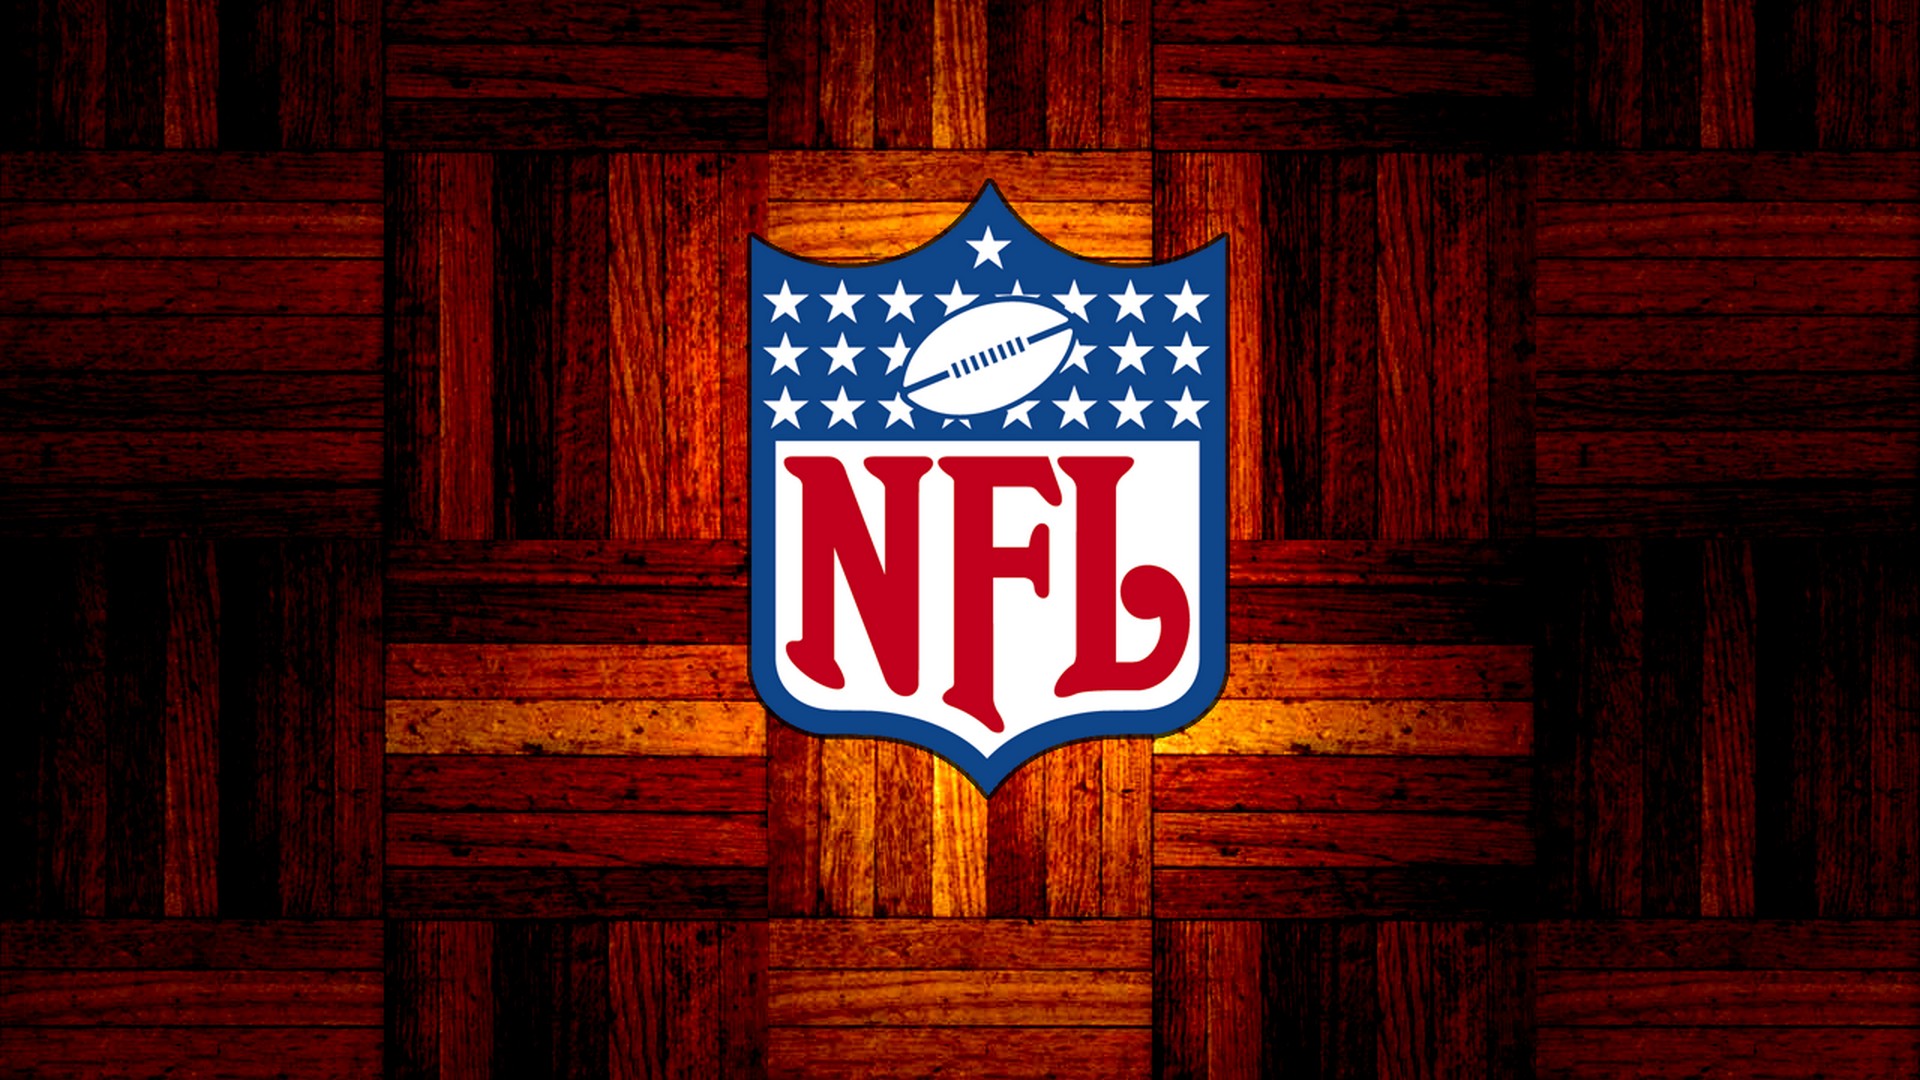 HD Cool NFL Wallpapers With Resolution 1920X1080